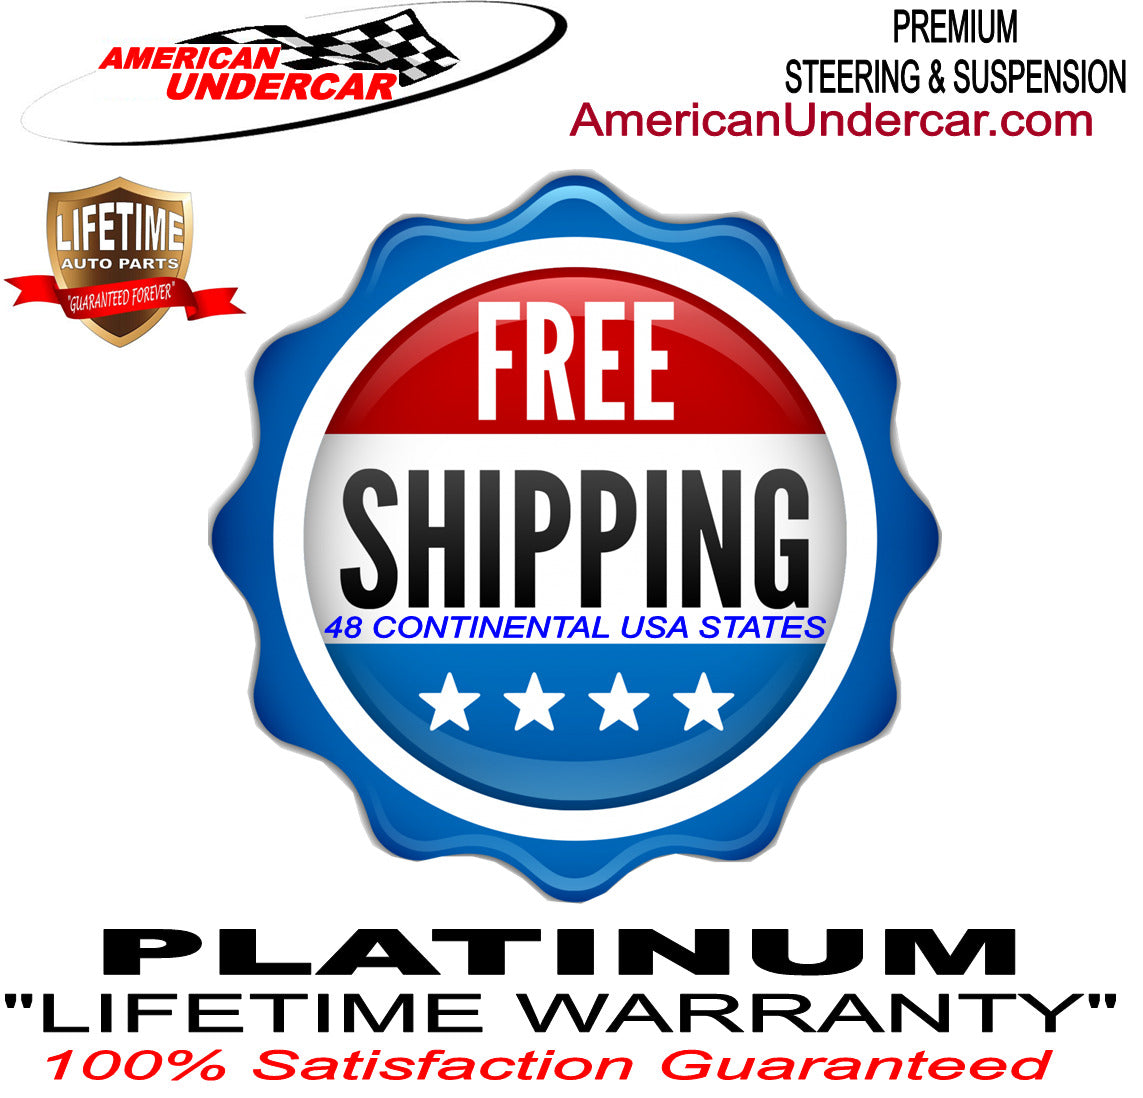 Lifetime Hub Bearing Assembly for 2011-2016 Ford F450 Super Duty 4x4